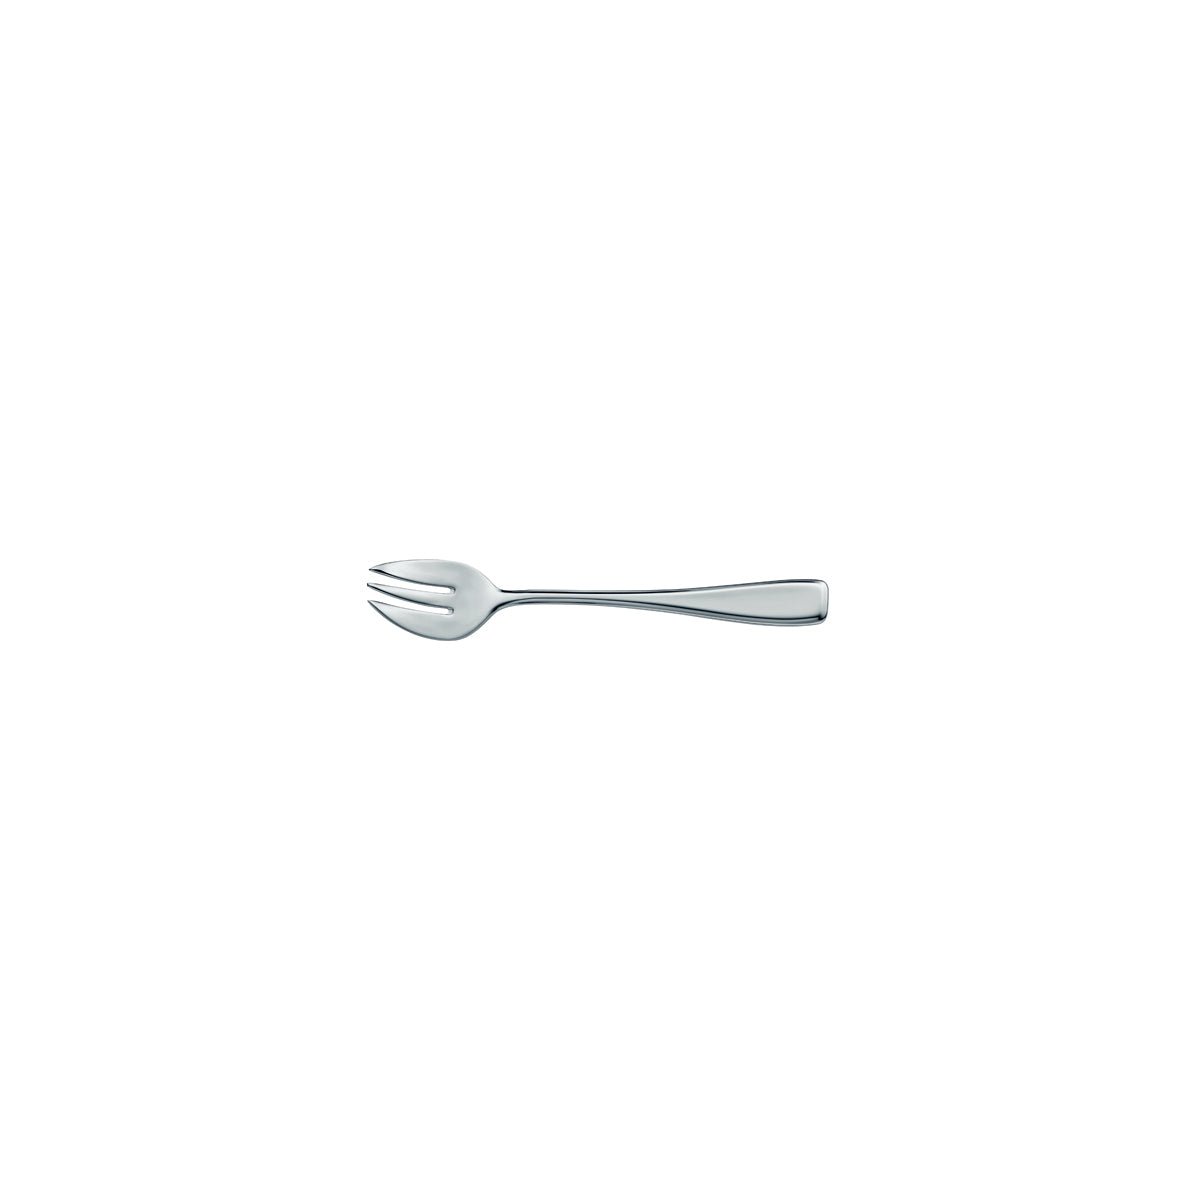 10.7940.6060 WMF Solid Oyster Fork Silverplated Tomkin Australia Hospitality Supplies